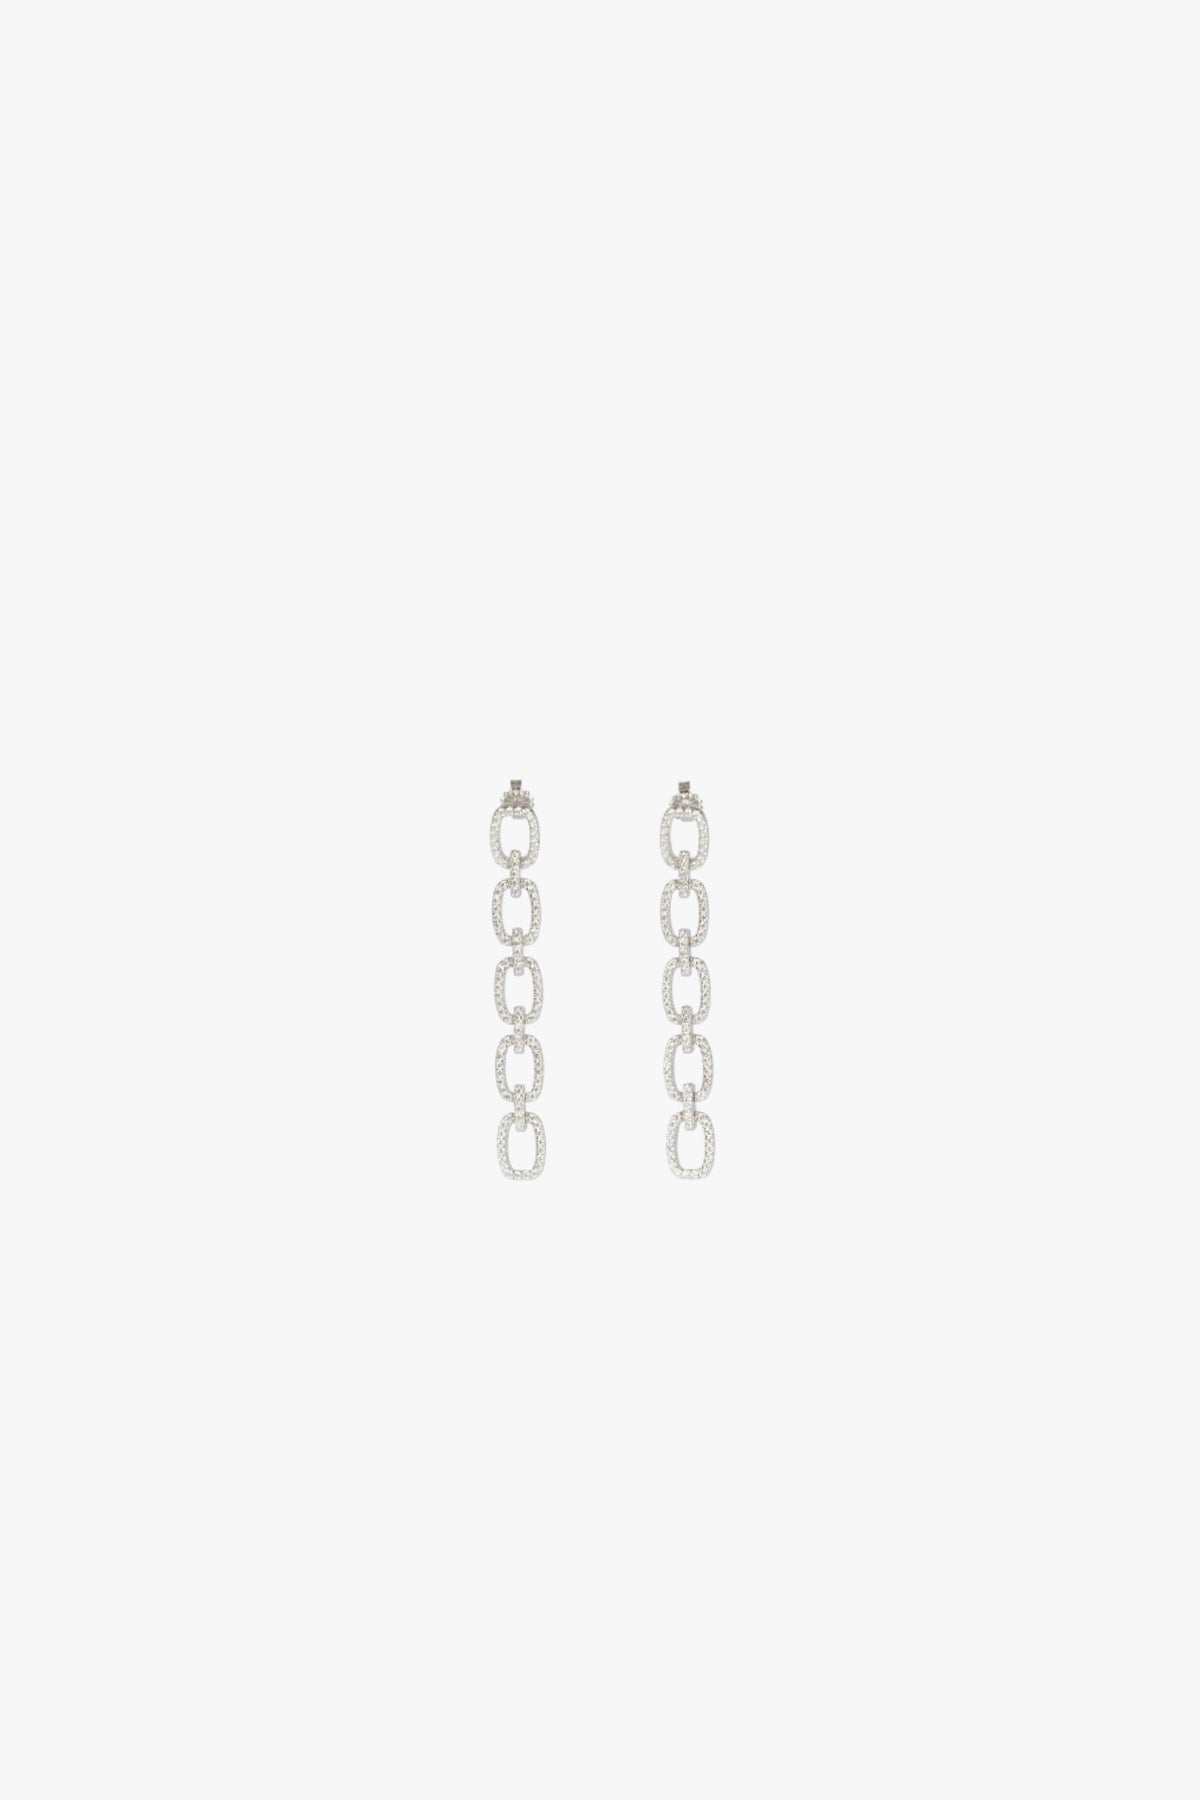 CHAINED EARRINGS - CLEAR